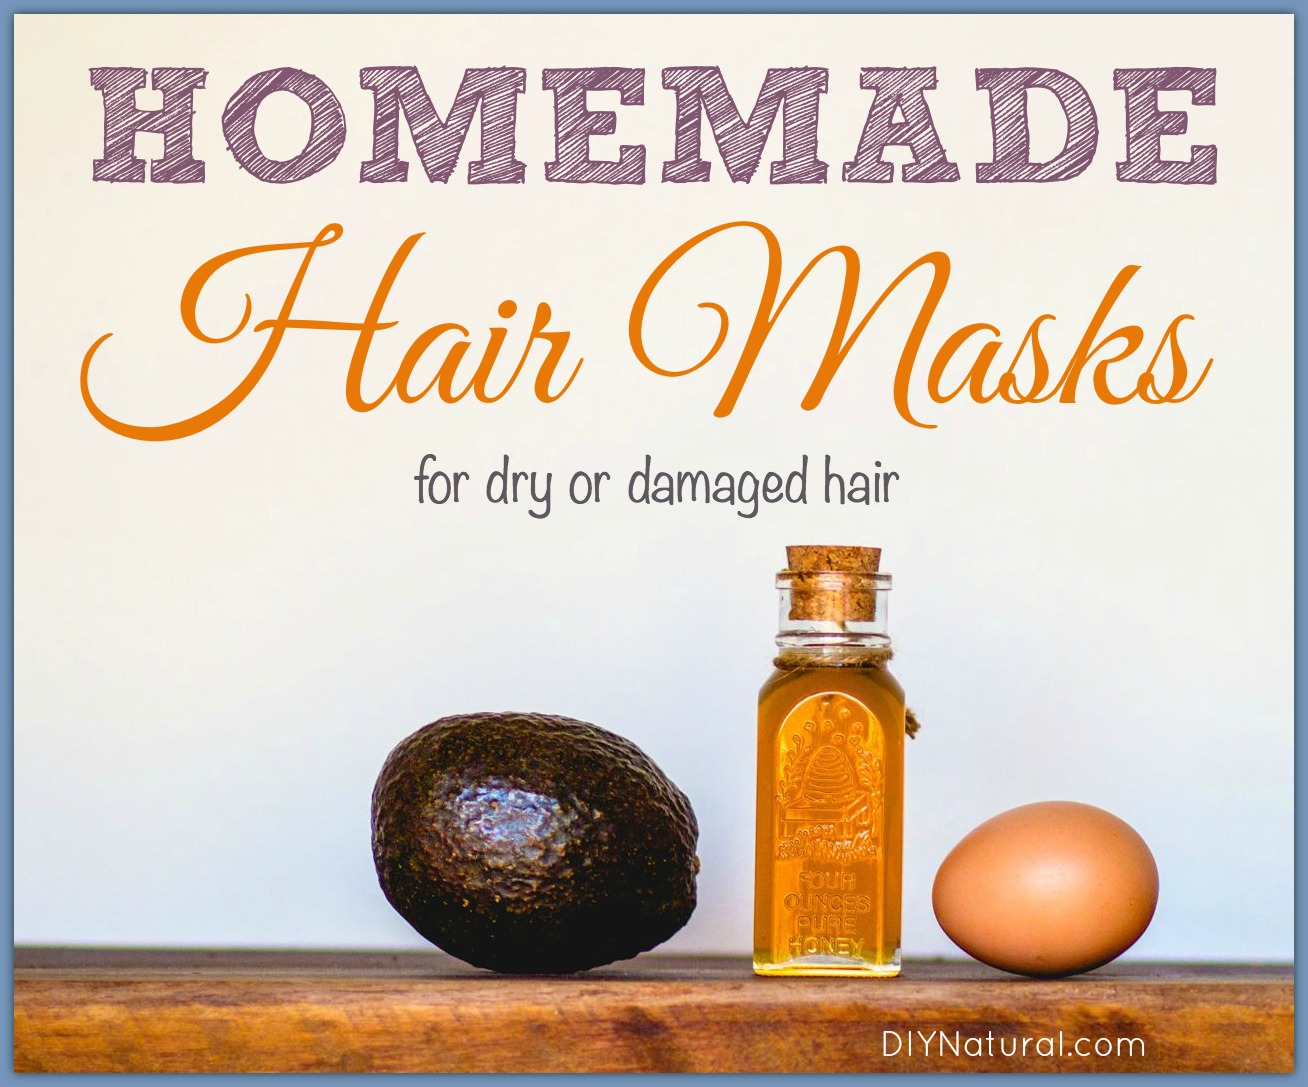 Homemade Hair Mask: Several Recipes for Dry or Damaged Hair